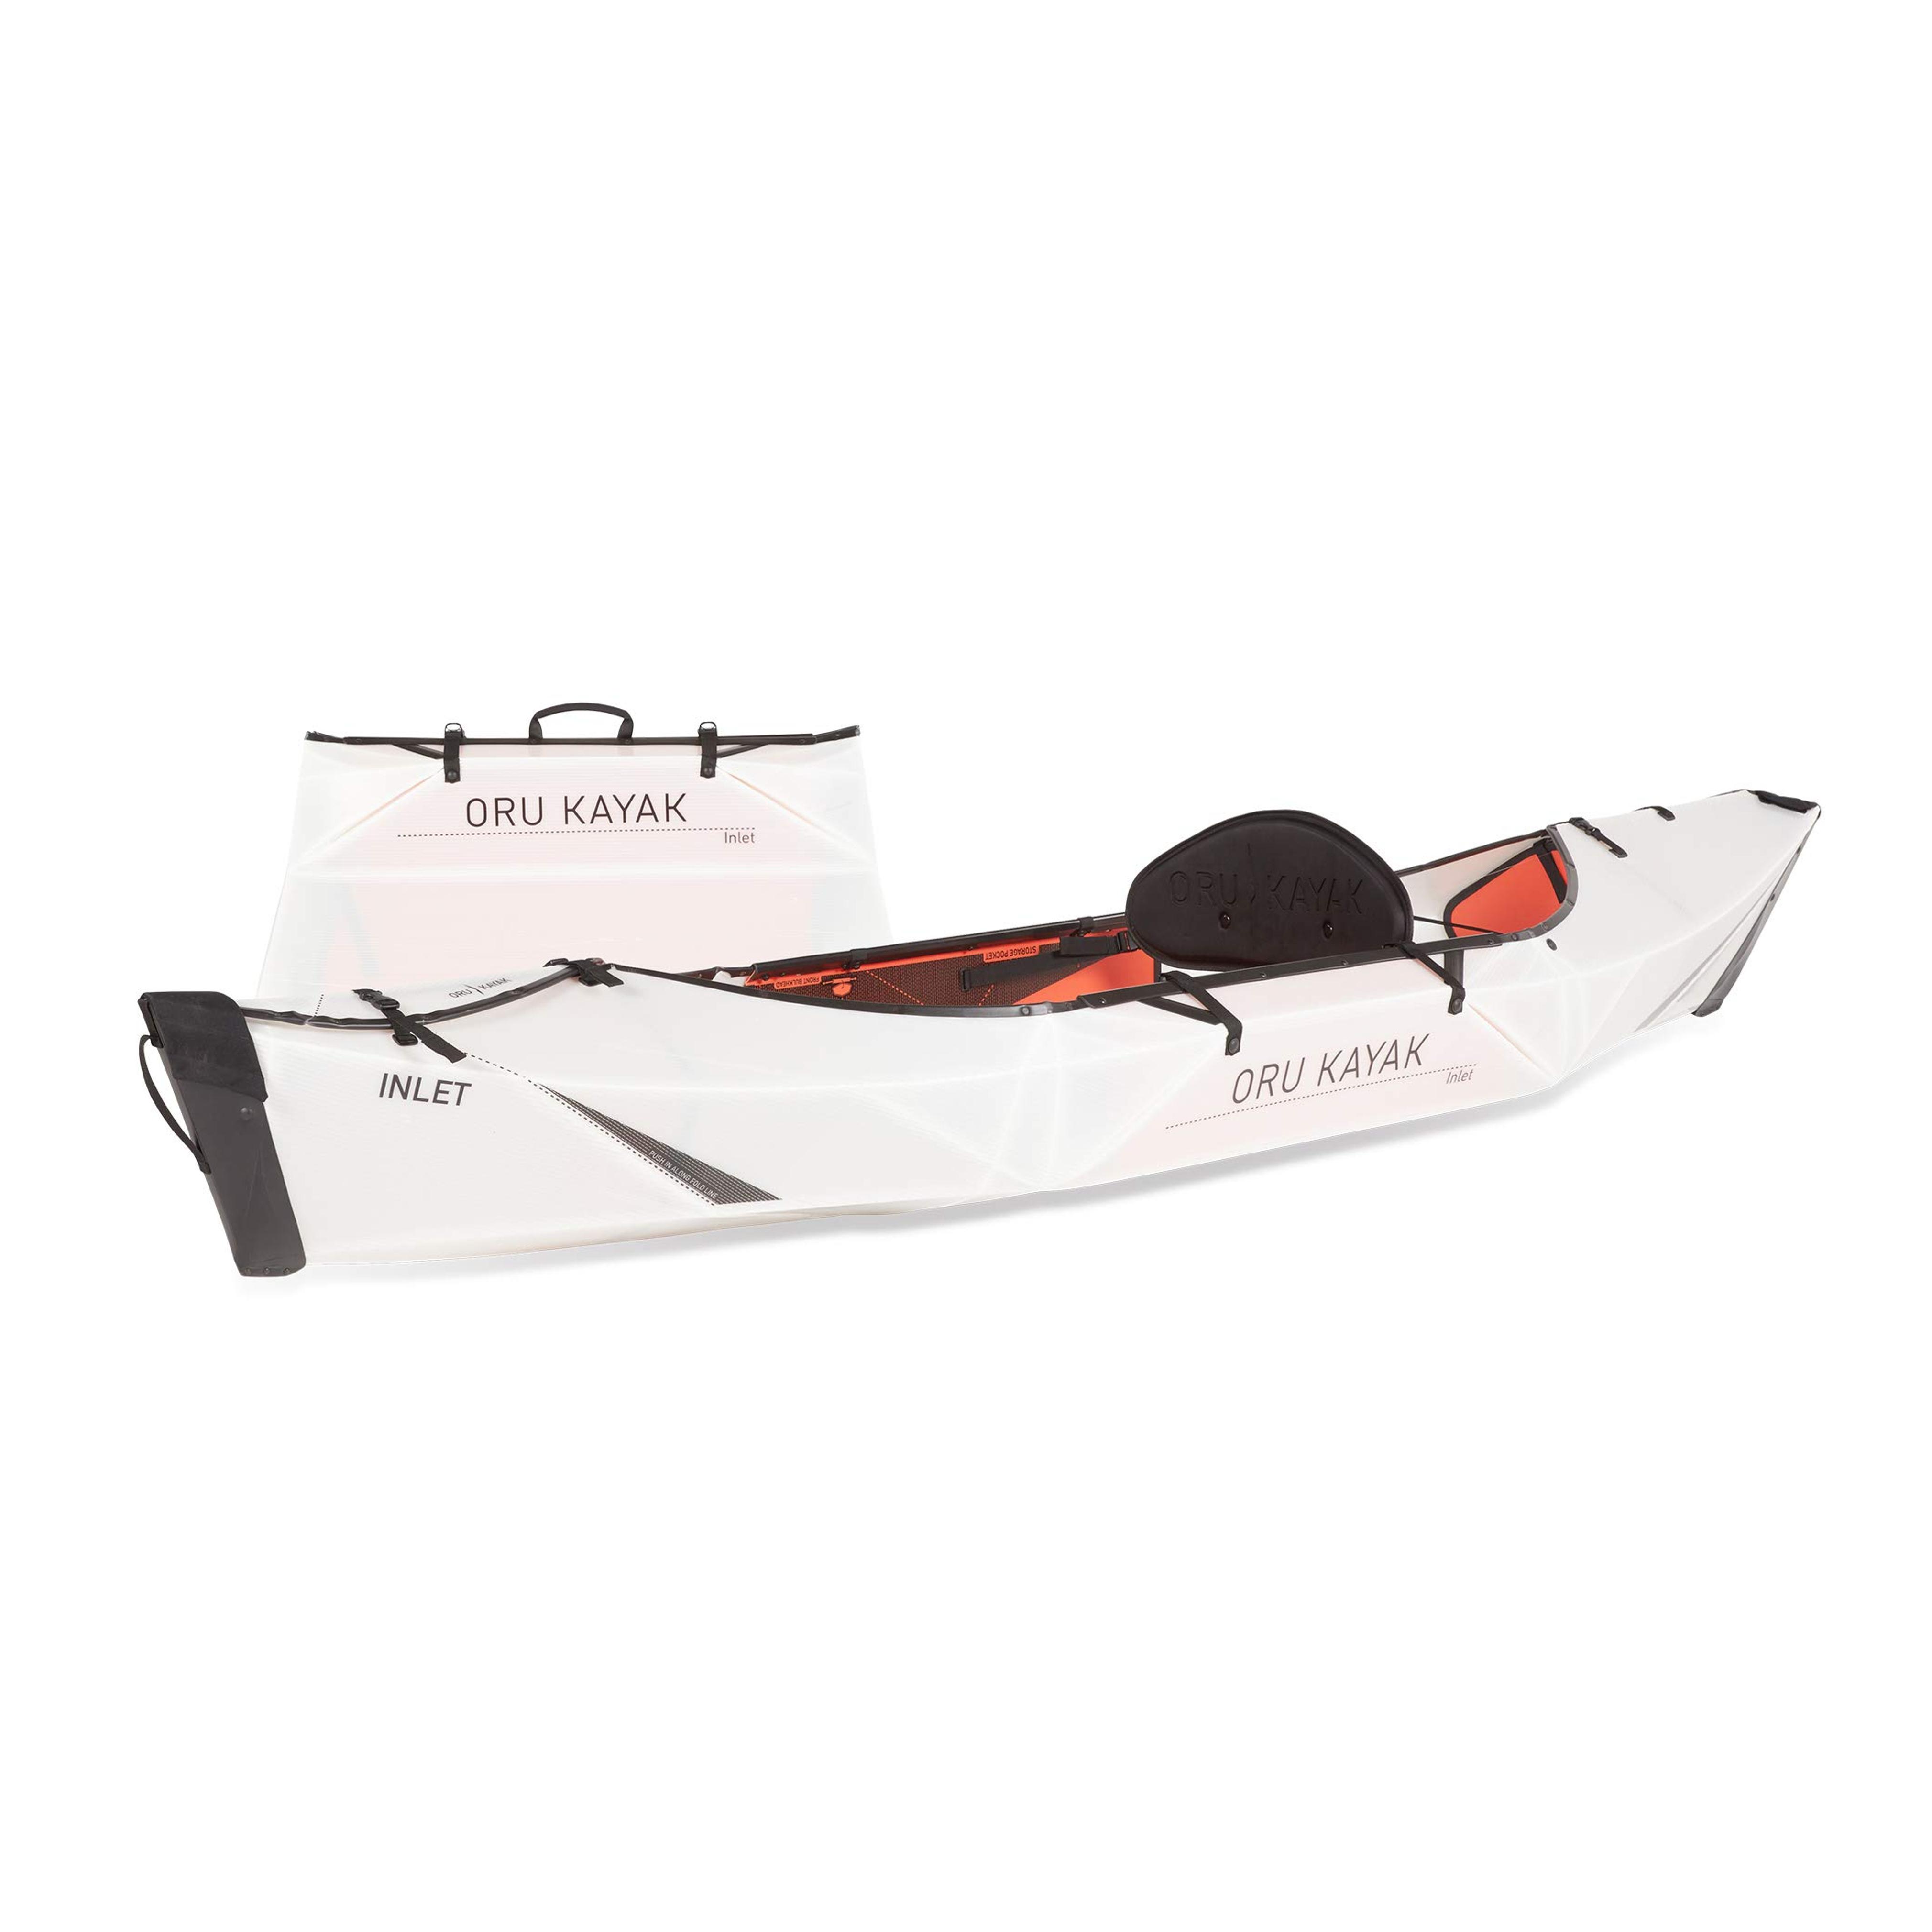 Oru Kayak Foldable Kayak - Stable, Durable, Lightweight Folding Kayaks for Adults and Youth - Lake, River, and Ocean Kayaks - Perfect Outdoor Fun Boat for Fishing, Travel, and Adventure